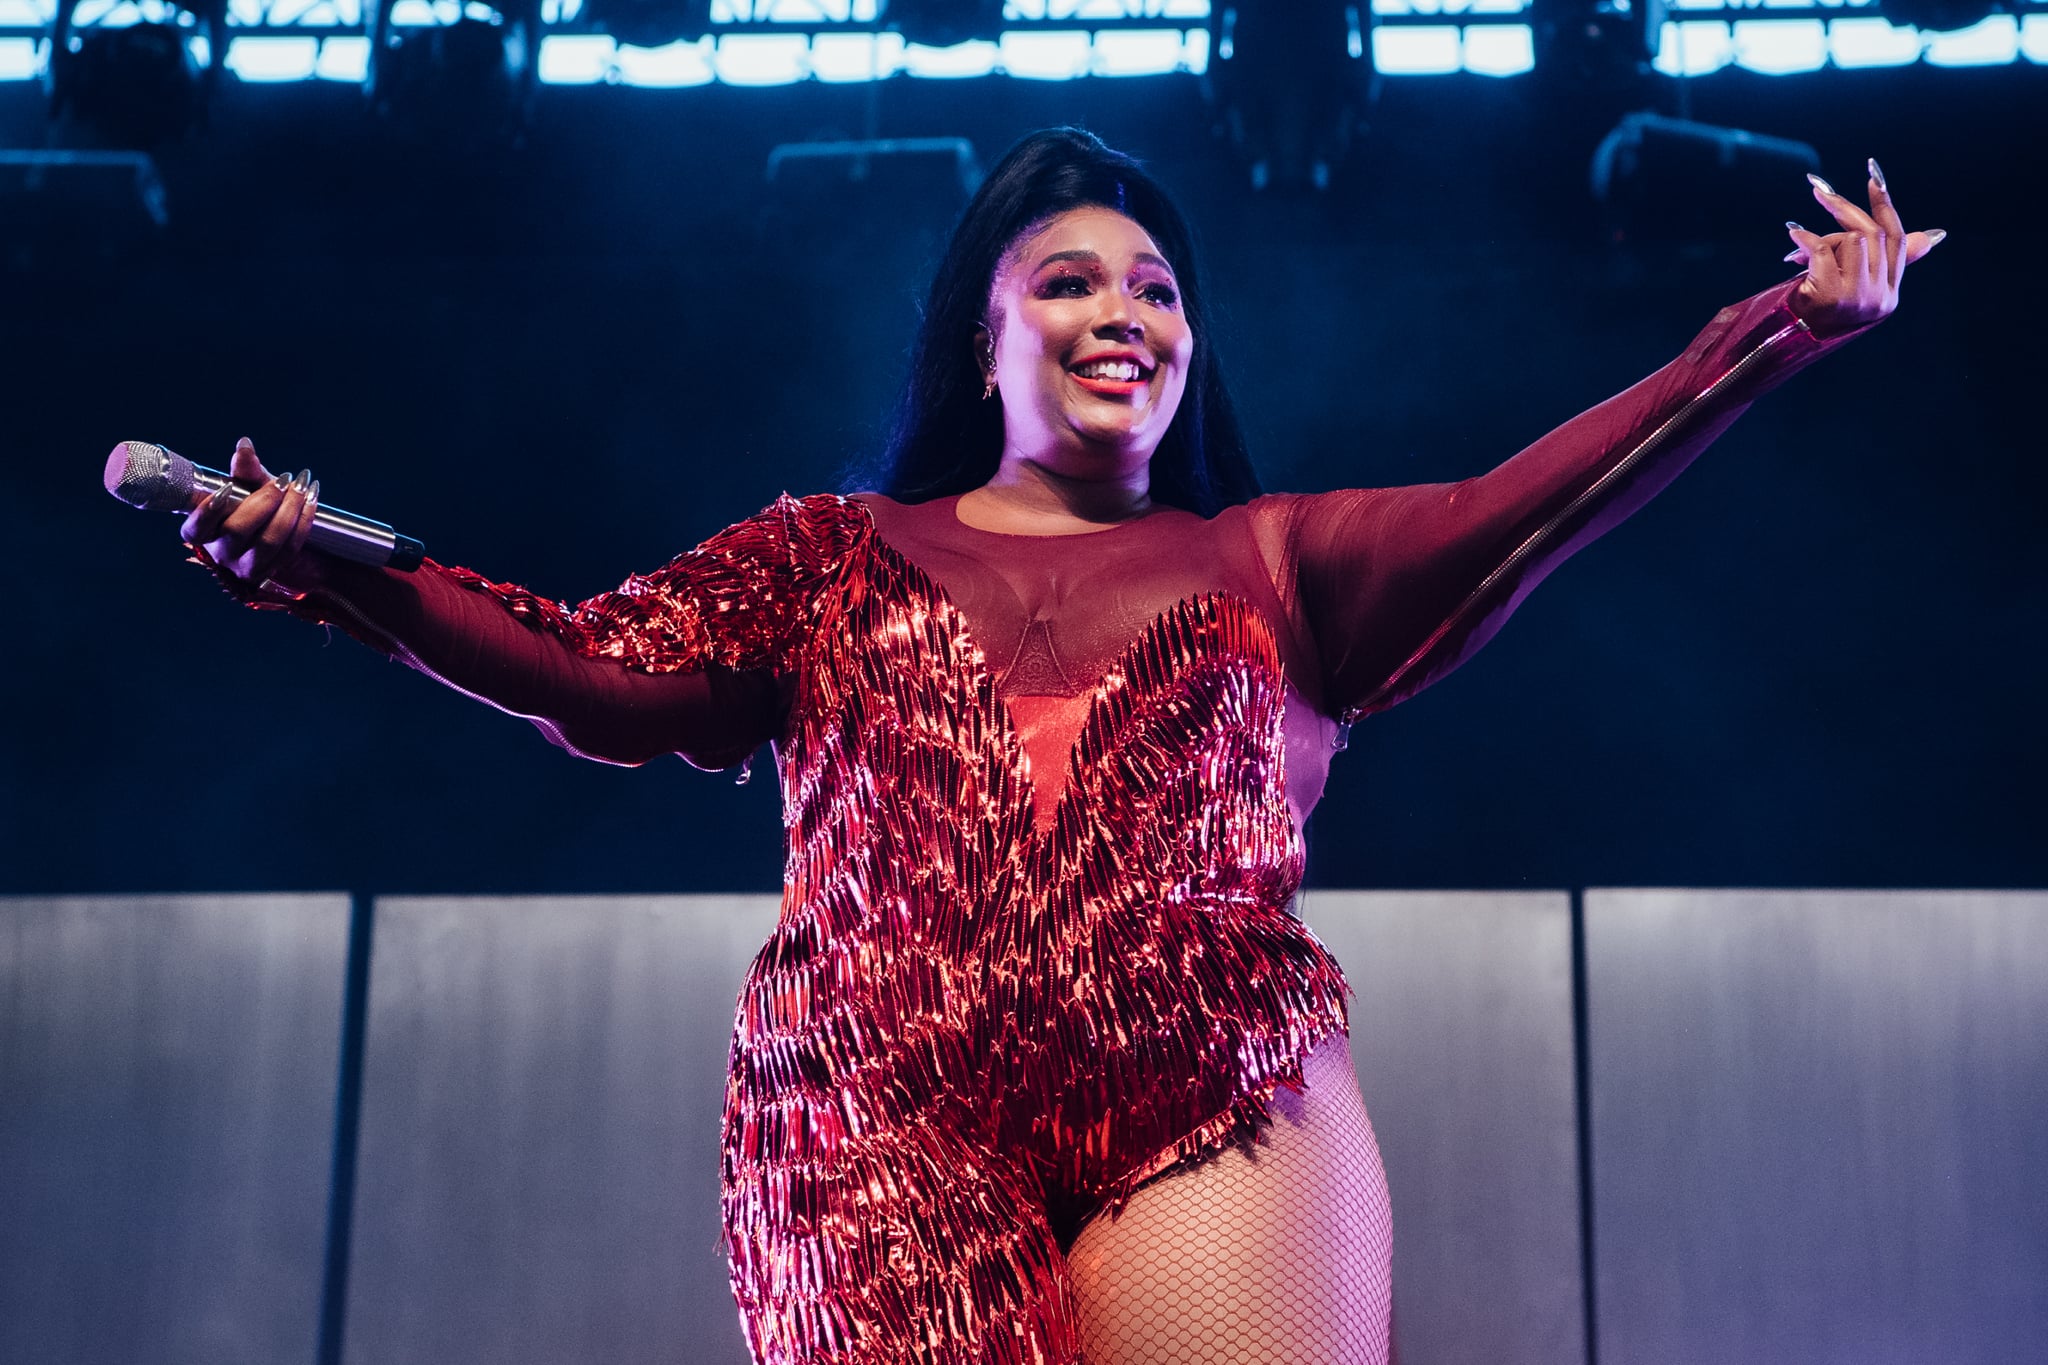 INDIO, CALIFORNIA - APRIL 21: Lizzo performs onstage at the 2019 Coachella Valley Music and Arts Festival on April 21, 2019 in Indio, California. (Photo by Emma McIntyre/Getty Images for Coachella)